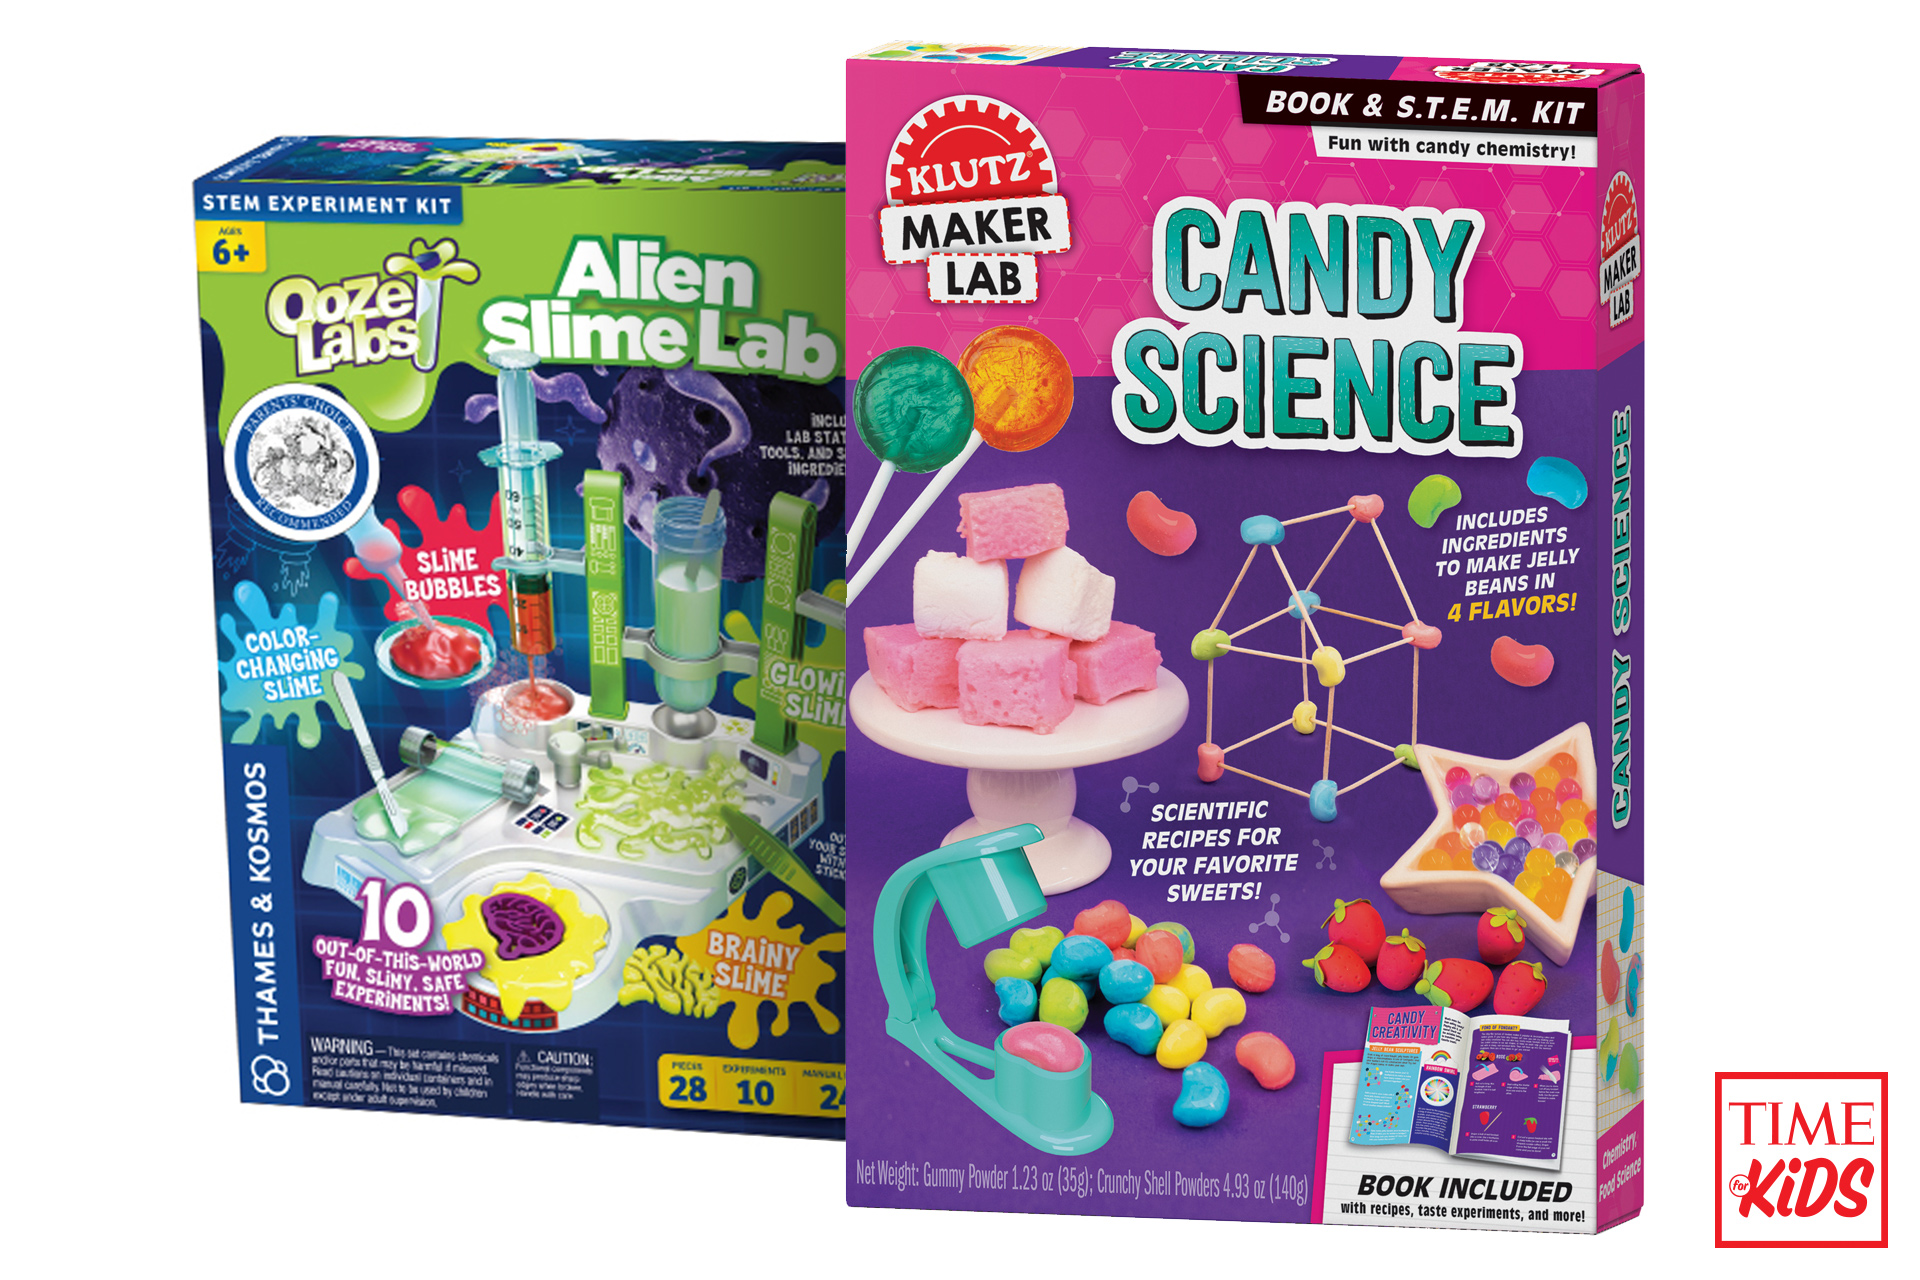 Picture of alien slime and candy science for toy guide.